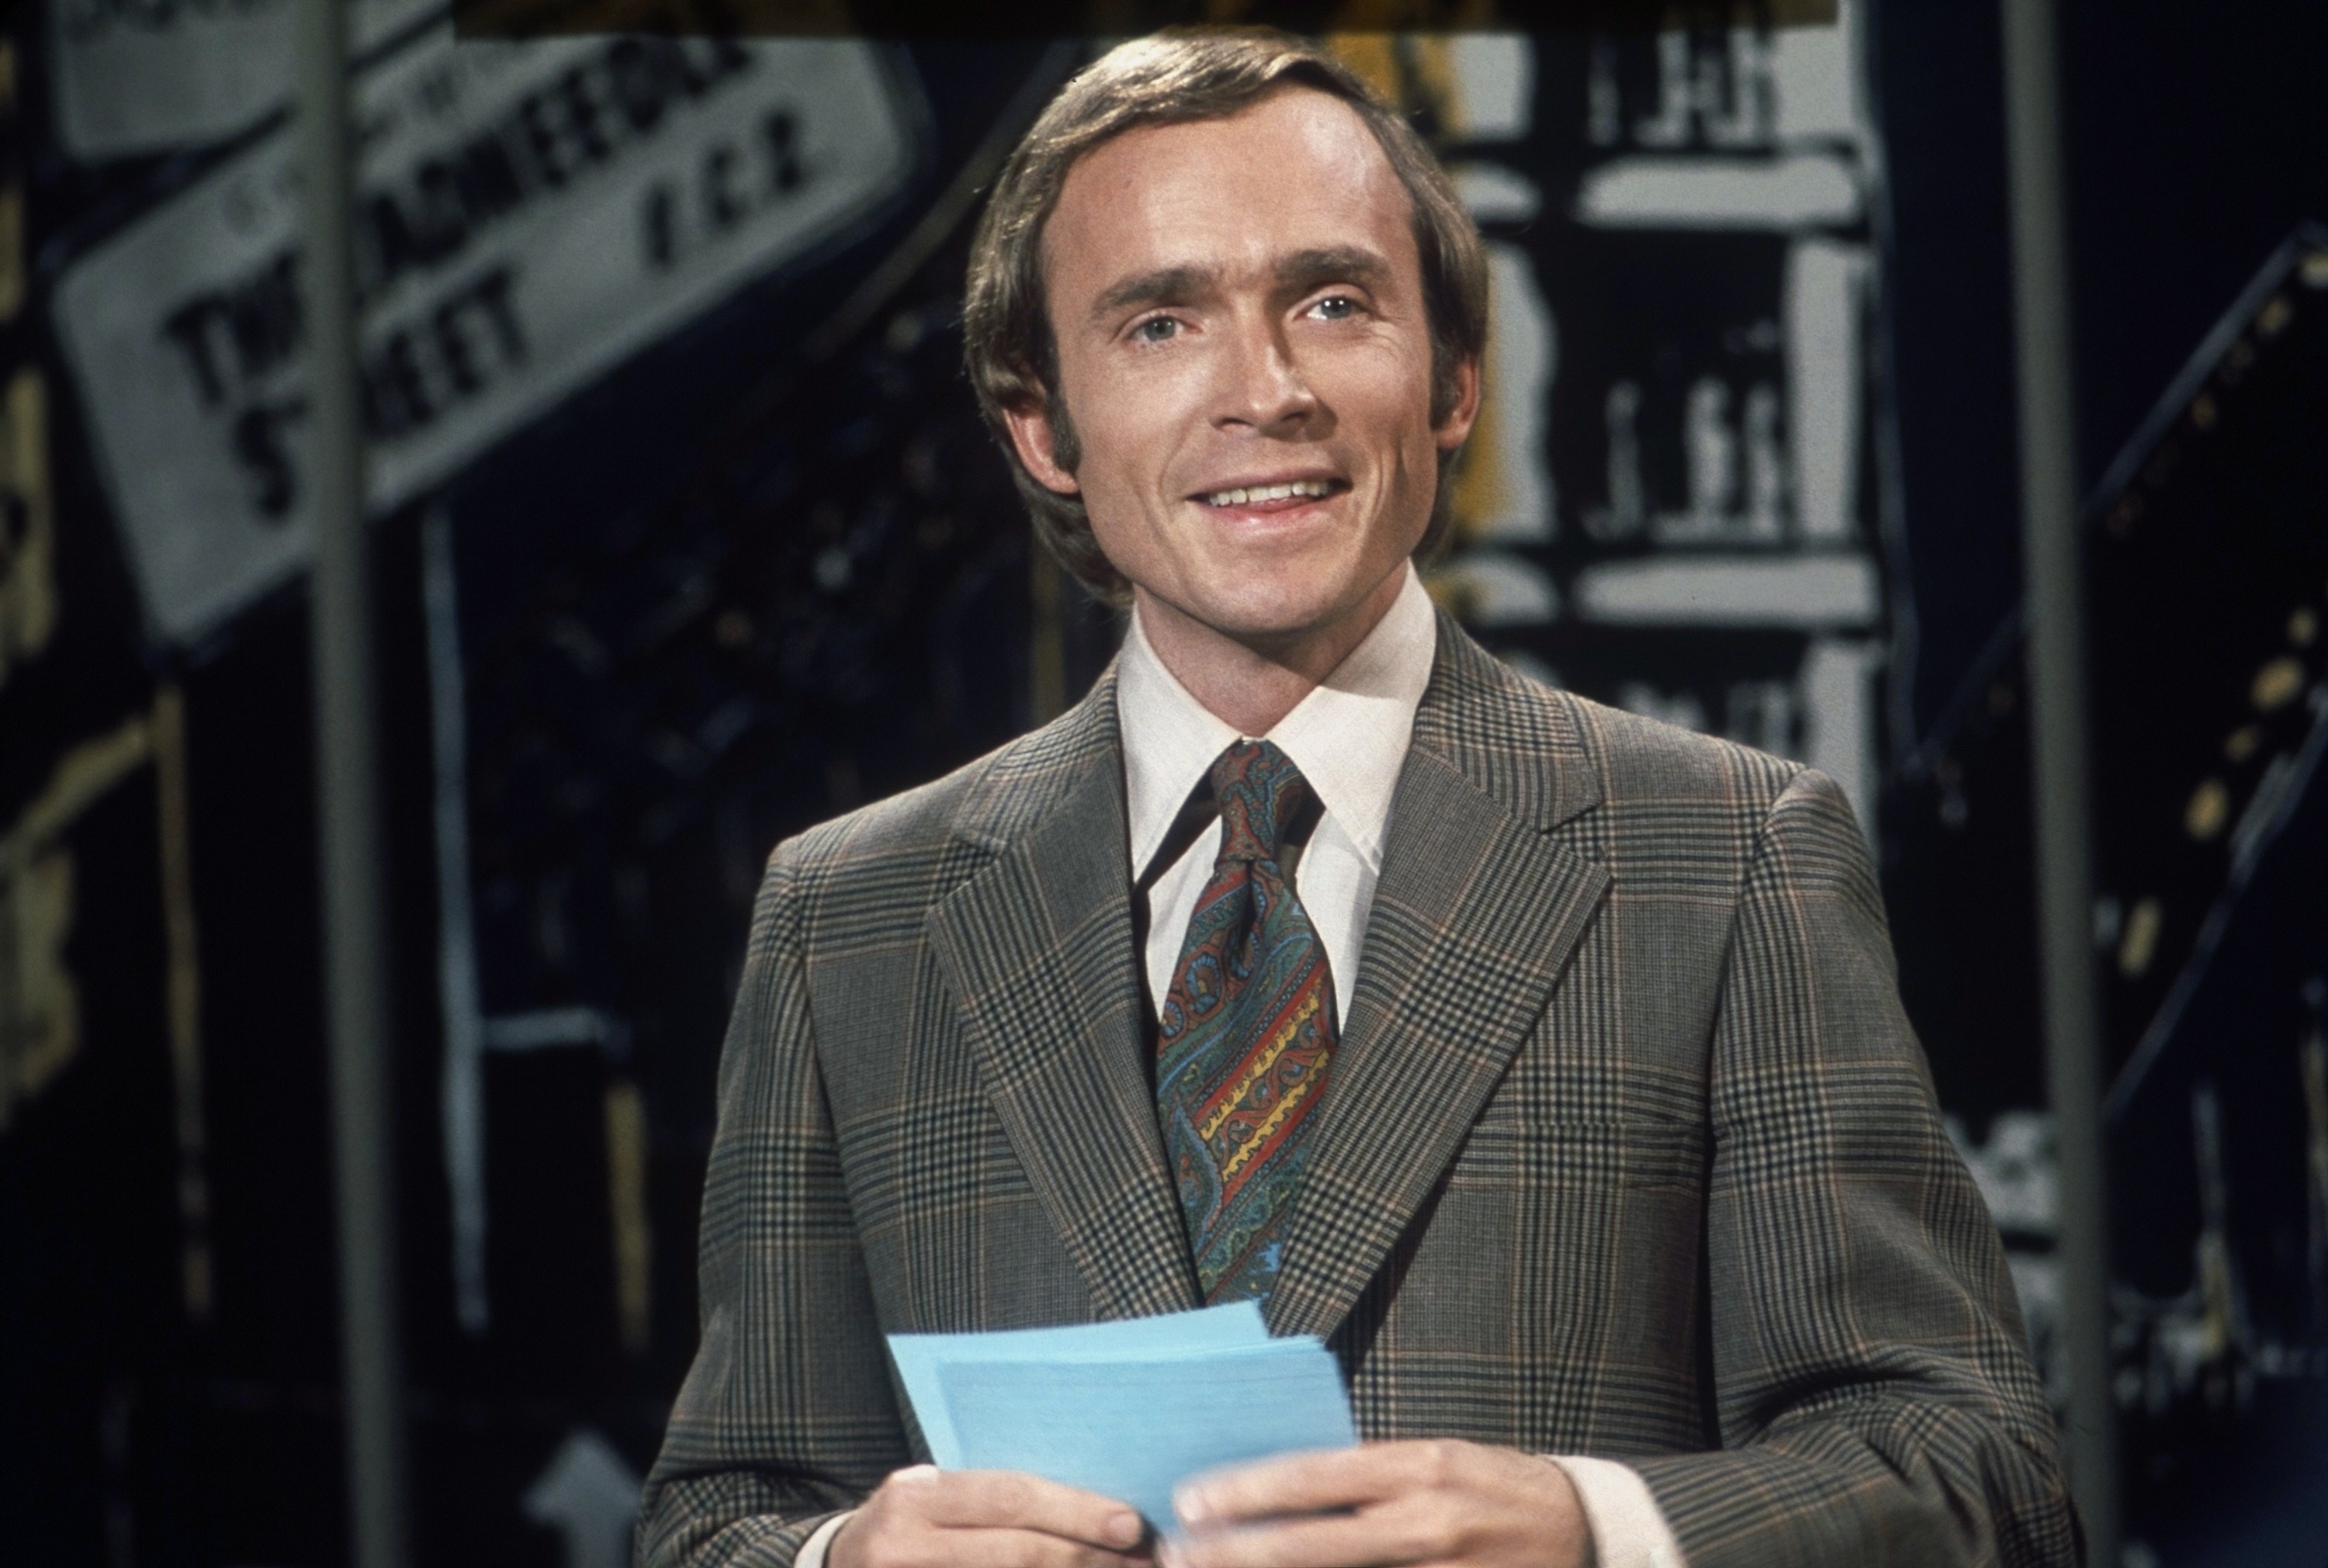 Cavett holding sheets of paper and wearing a suit and tie